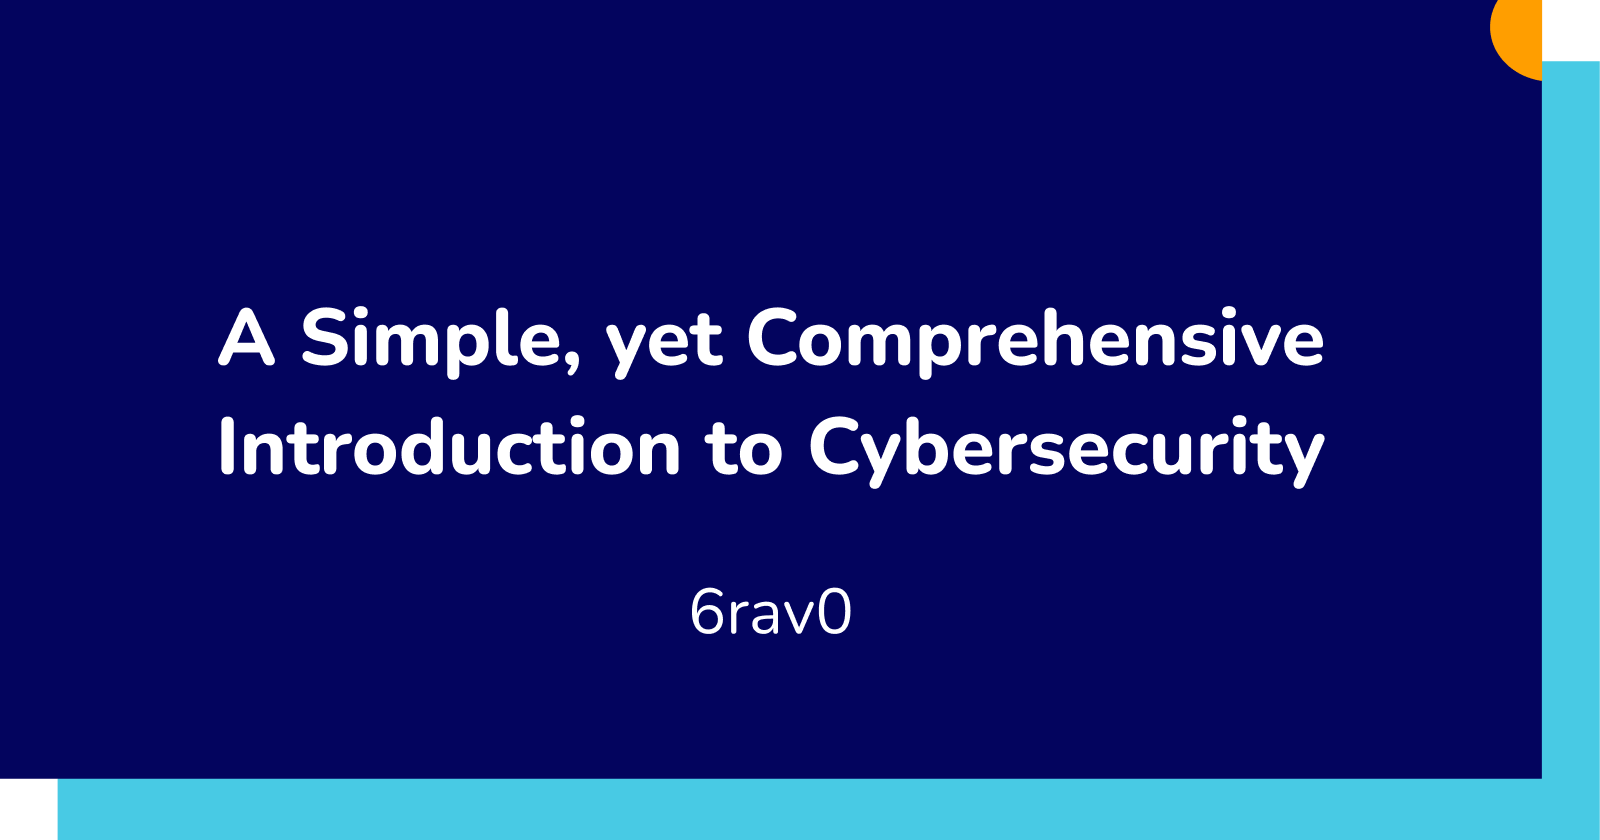 A Simple (yet Comprehensive) Introduction to Cybersecurity